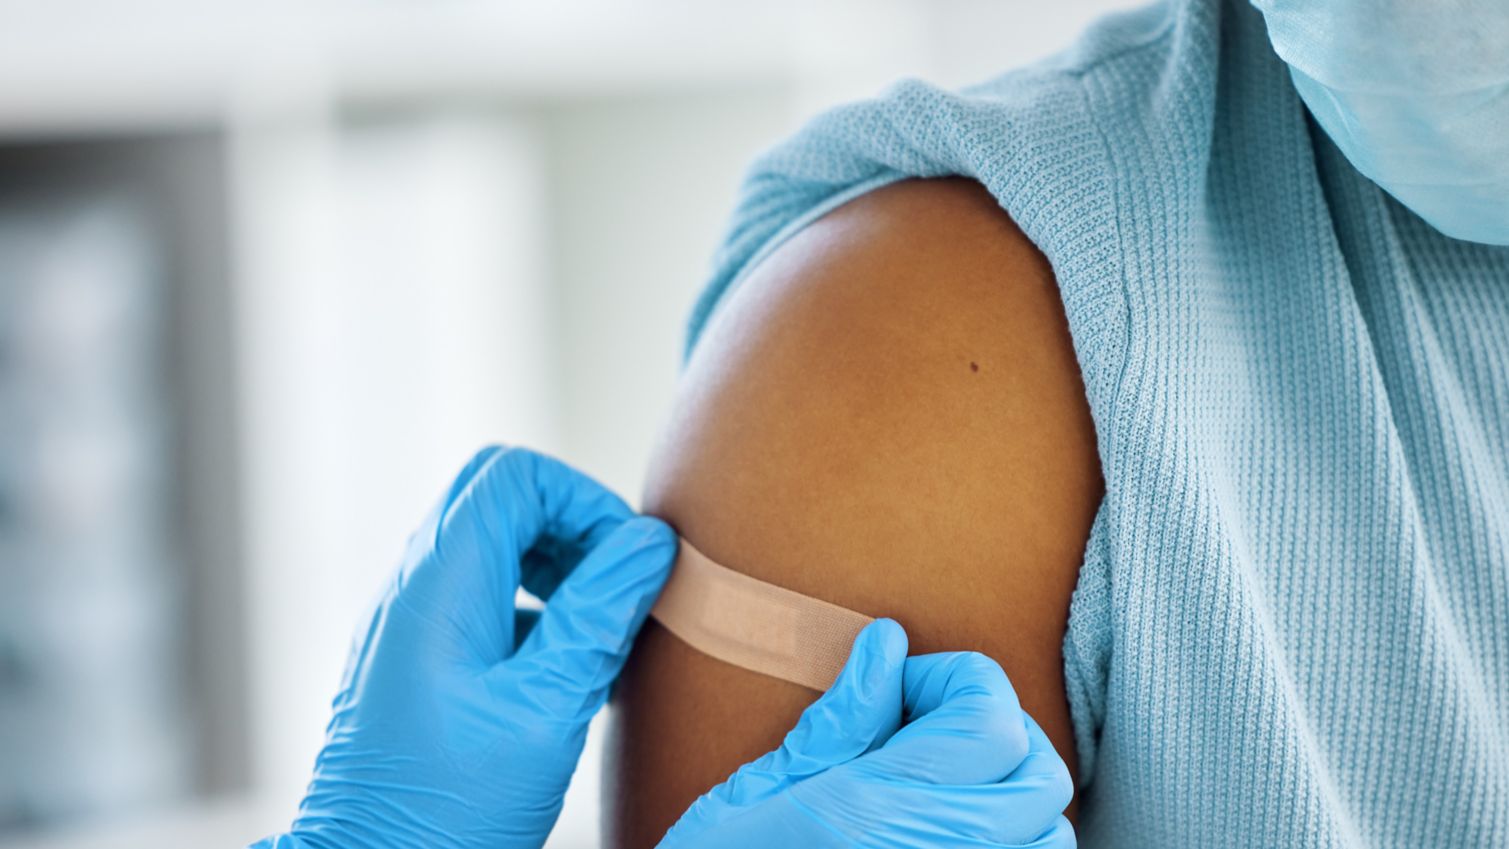 Medicaid doctor applies a bandage after vaccination